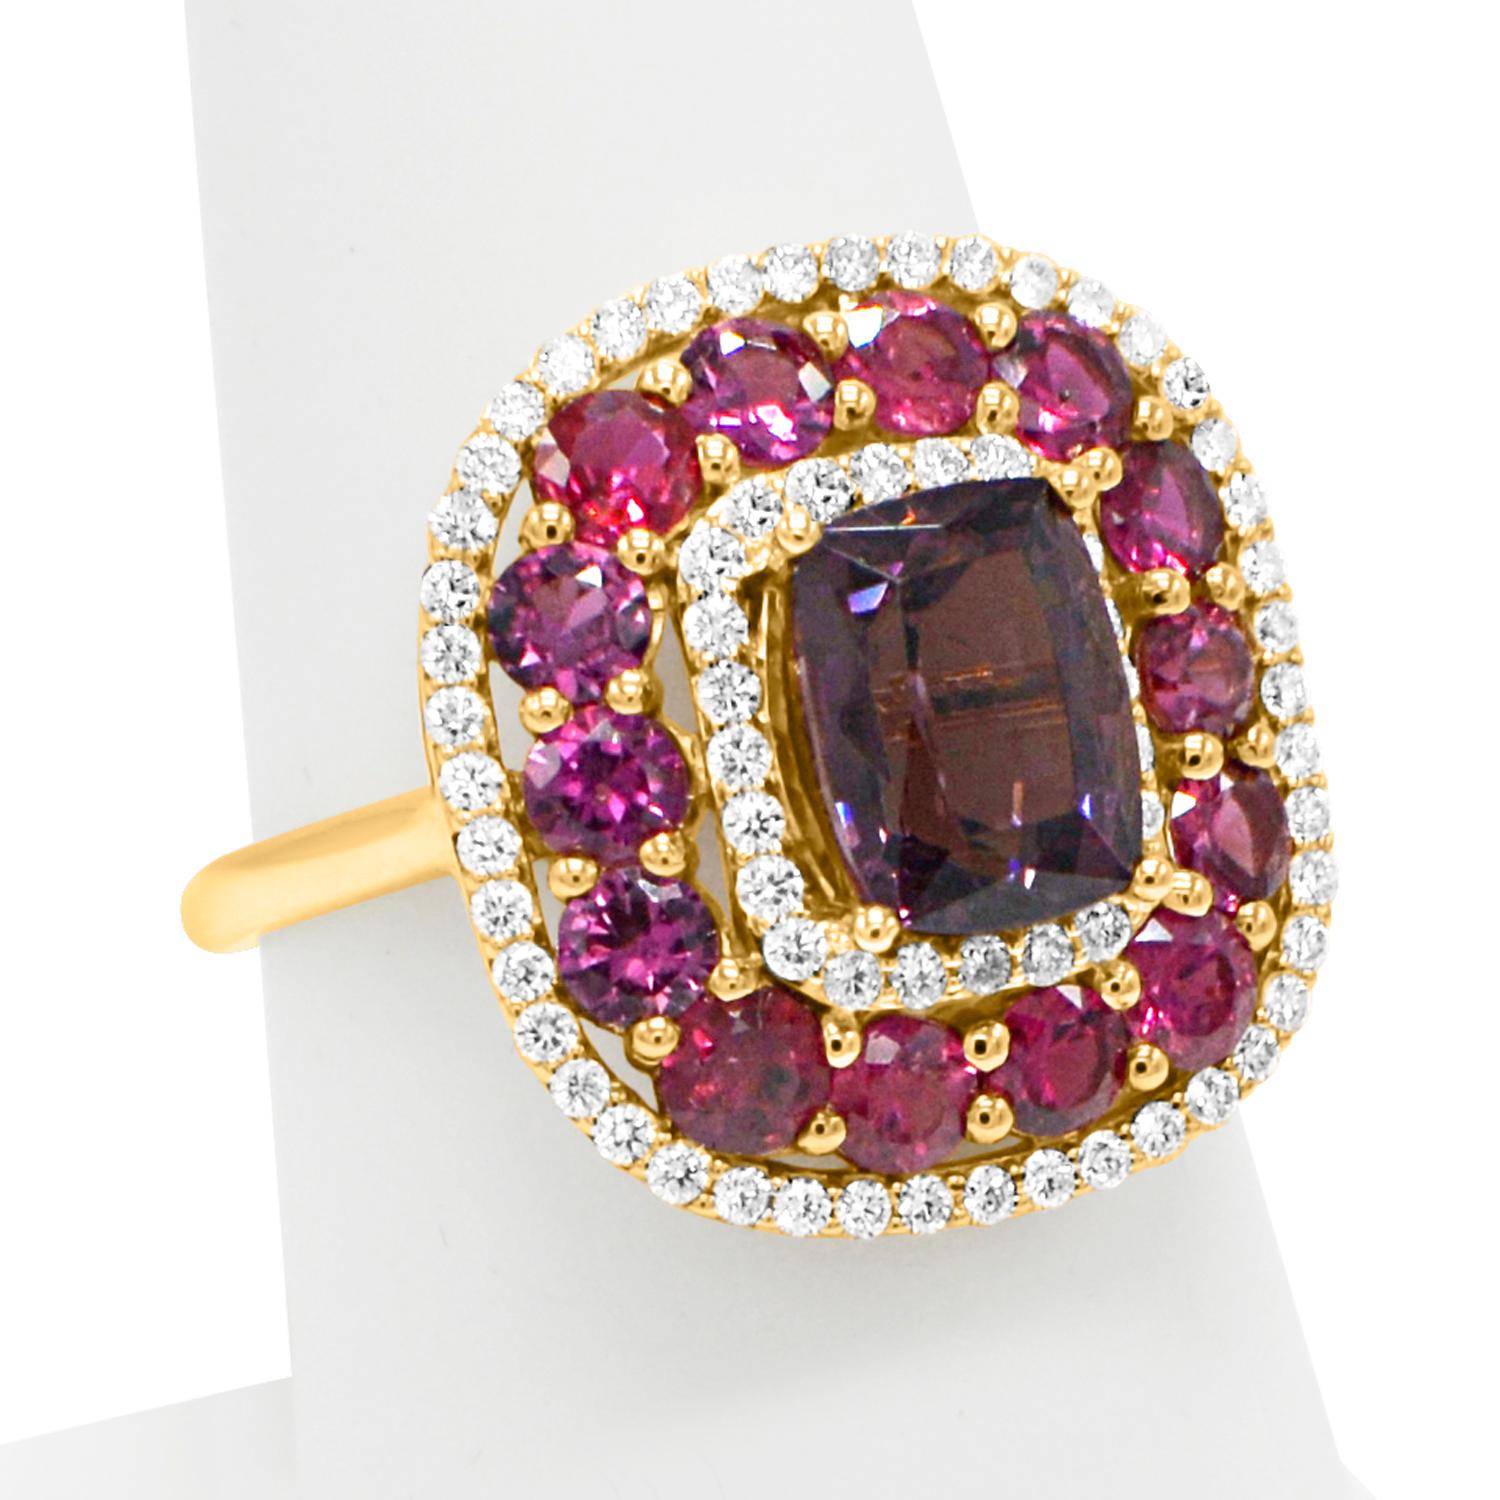 Brilliant - not heated or treated- all very natural.
Ruby &  Purple Spinel Cocktail Ring,
Center Natural Spinel 2.40 carat.
Surrounded with Natural Ruby - Total 2.11 carat
14k Rose Gold  5.0 grams, 
Diamonds 0.48 carat F-G-VVS.
Finger size 7
all